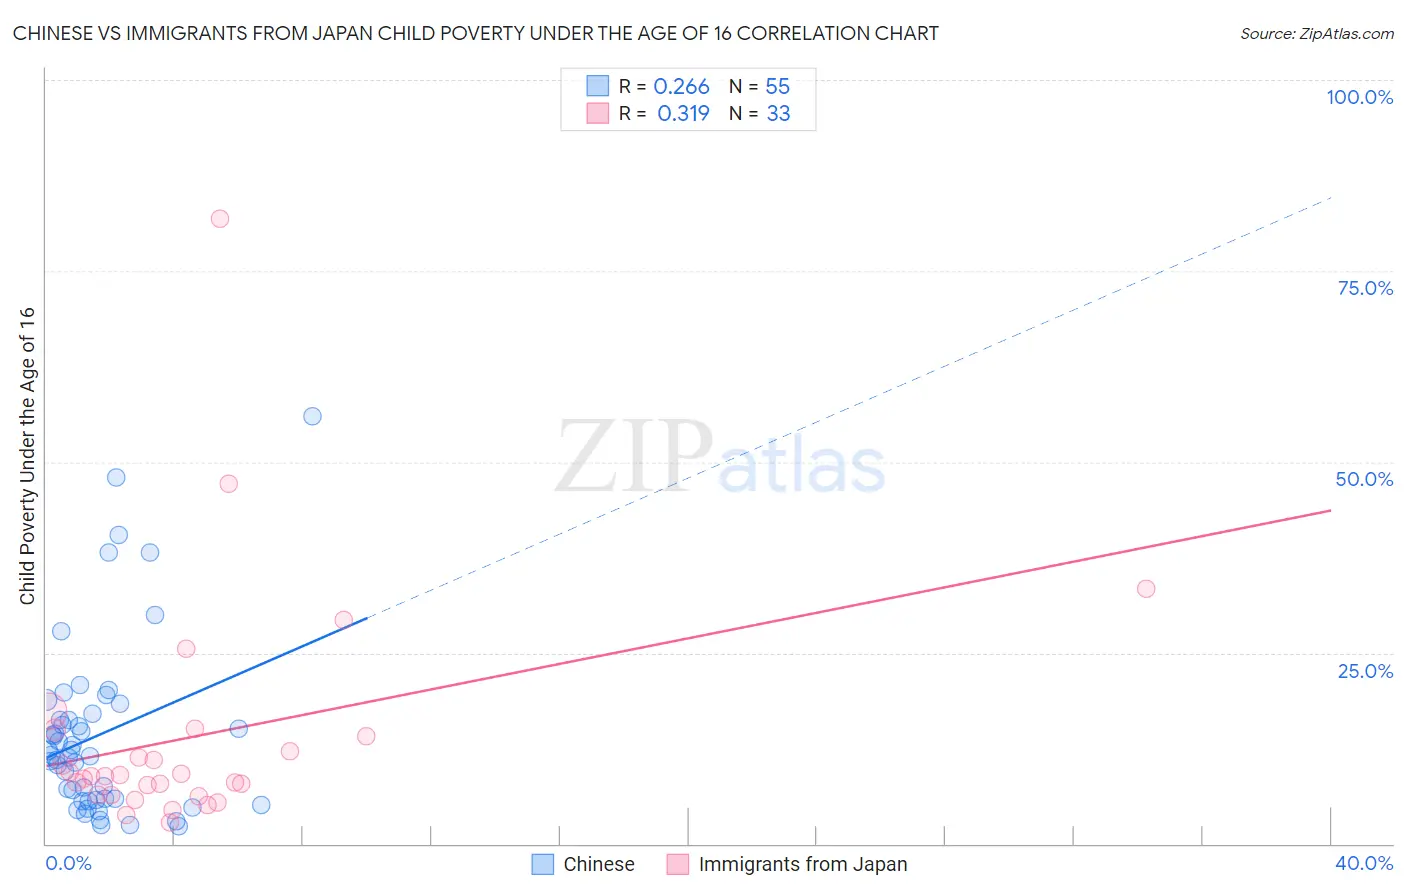 Chinese vs Immigrants from Japan Child Poverty Under the Age of 16